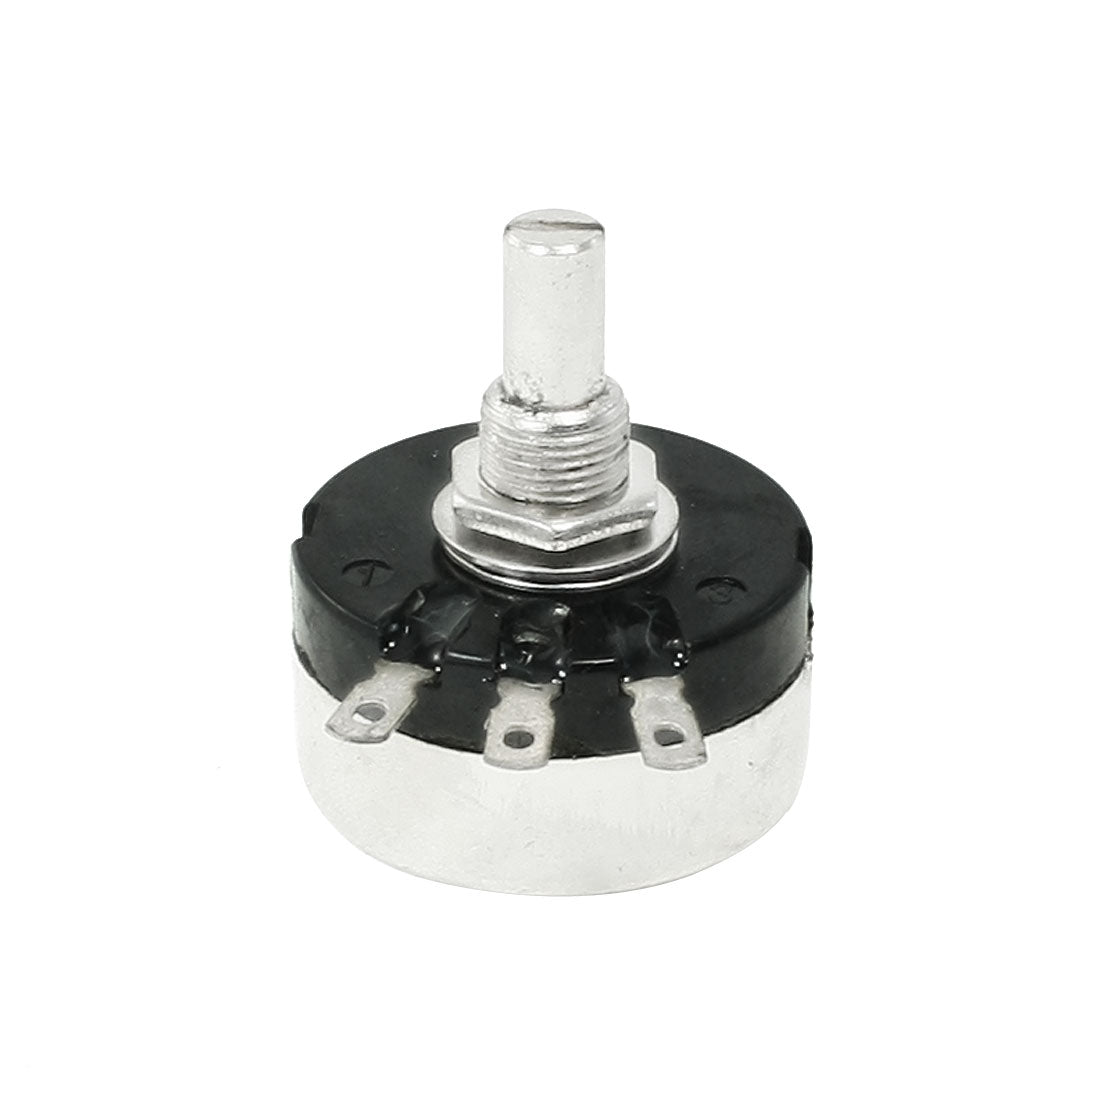 uxcell Uxcell RV30YN20S/B102 1K ohm 6mm Round Shaft Carbon Film Rotary Taper Potentiometer